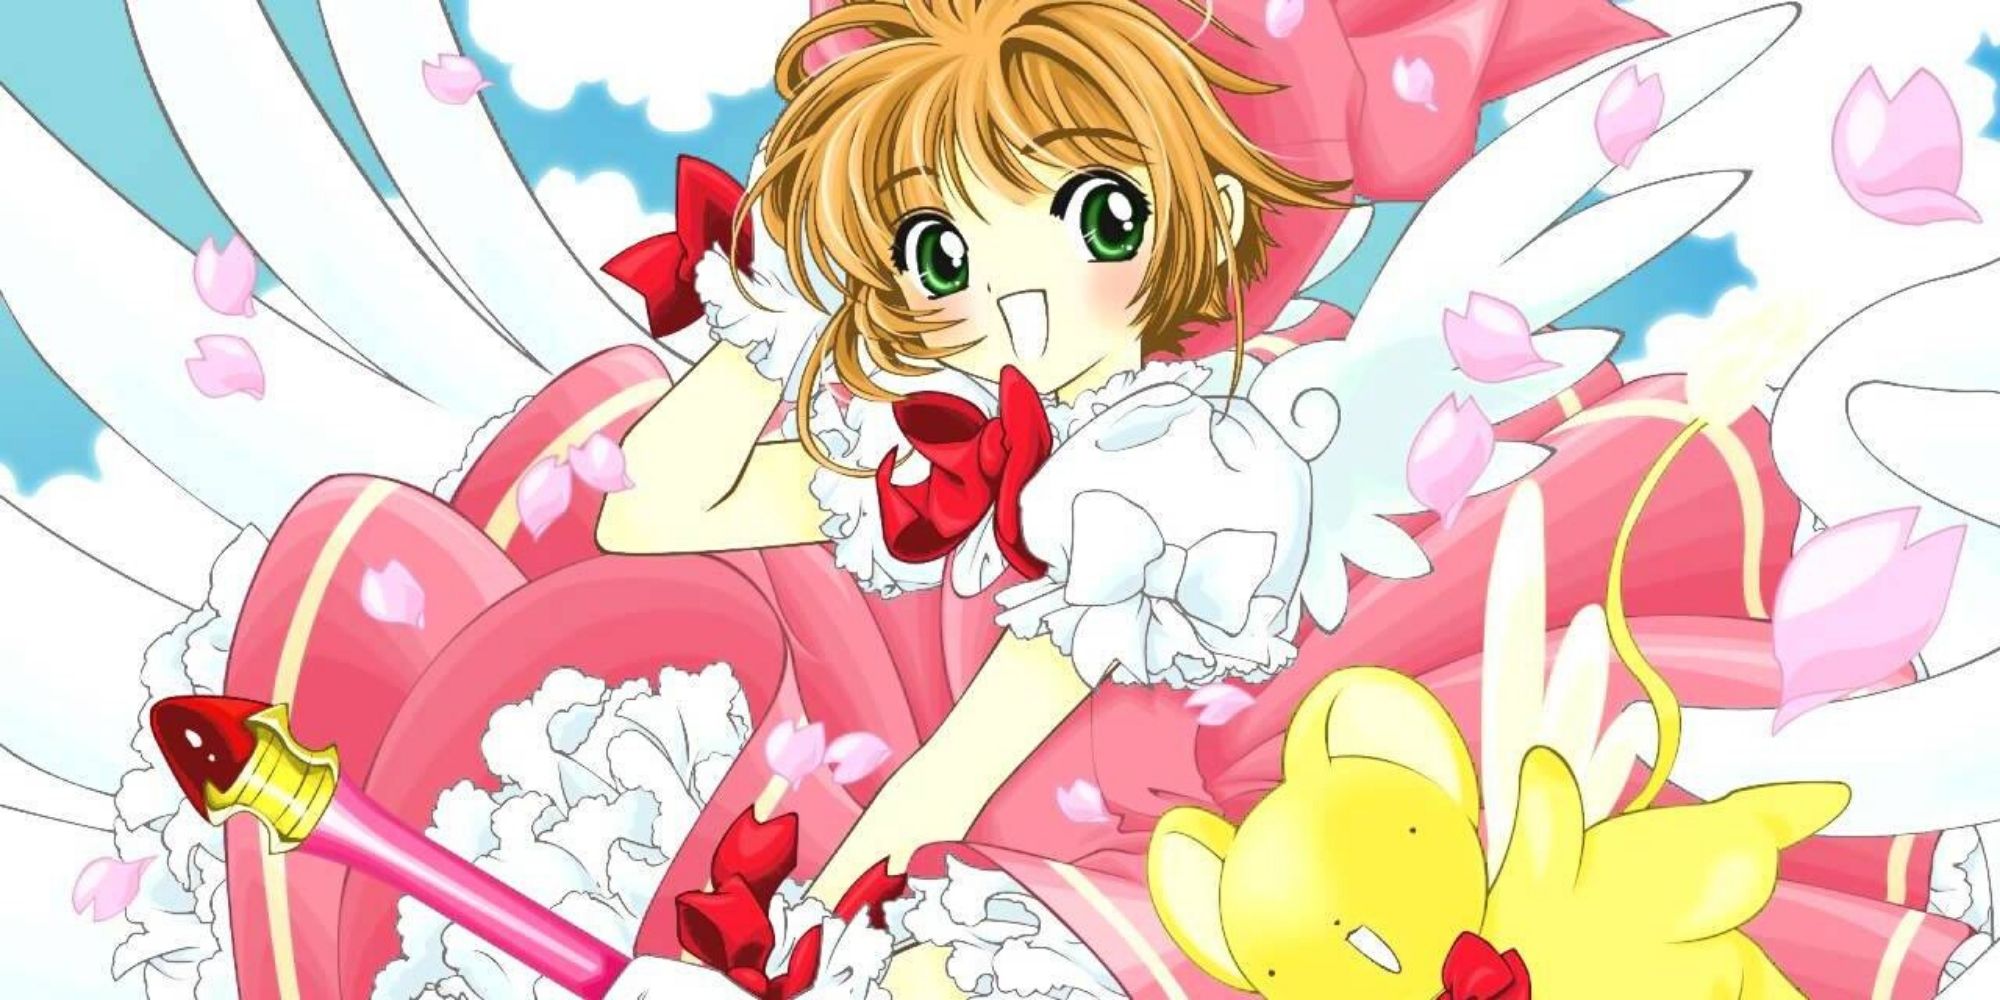 Cardcaptors 15 Things You Didn’t Know About Sakura